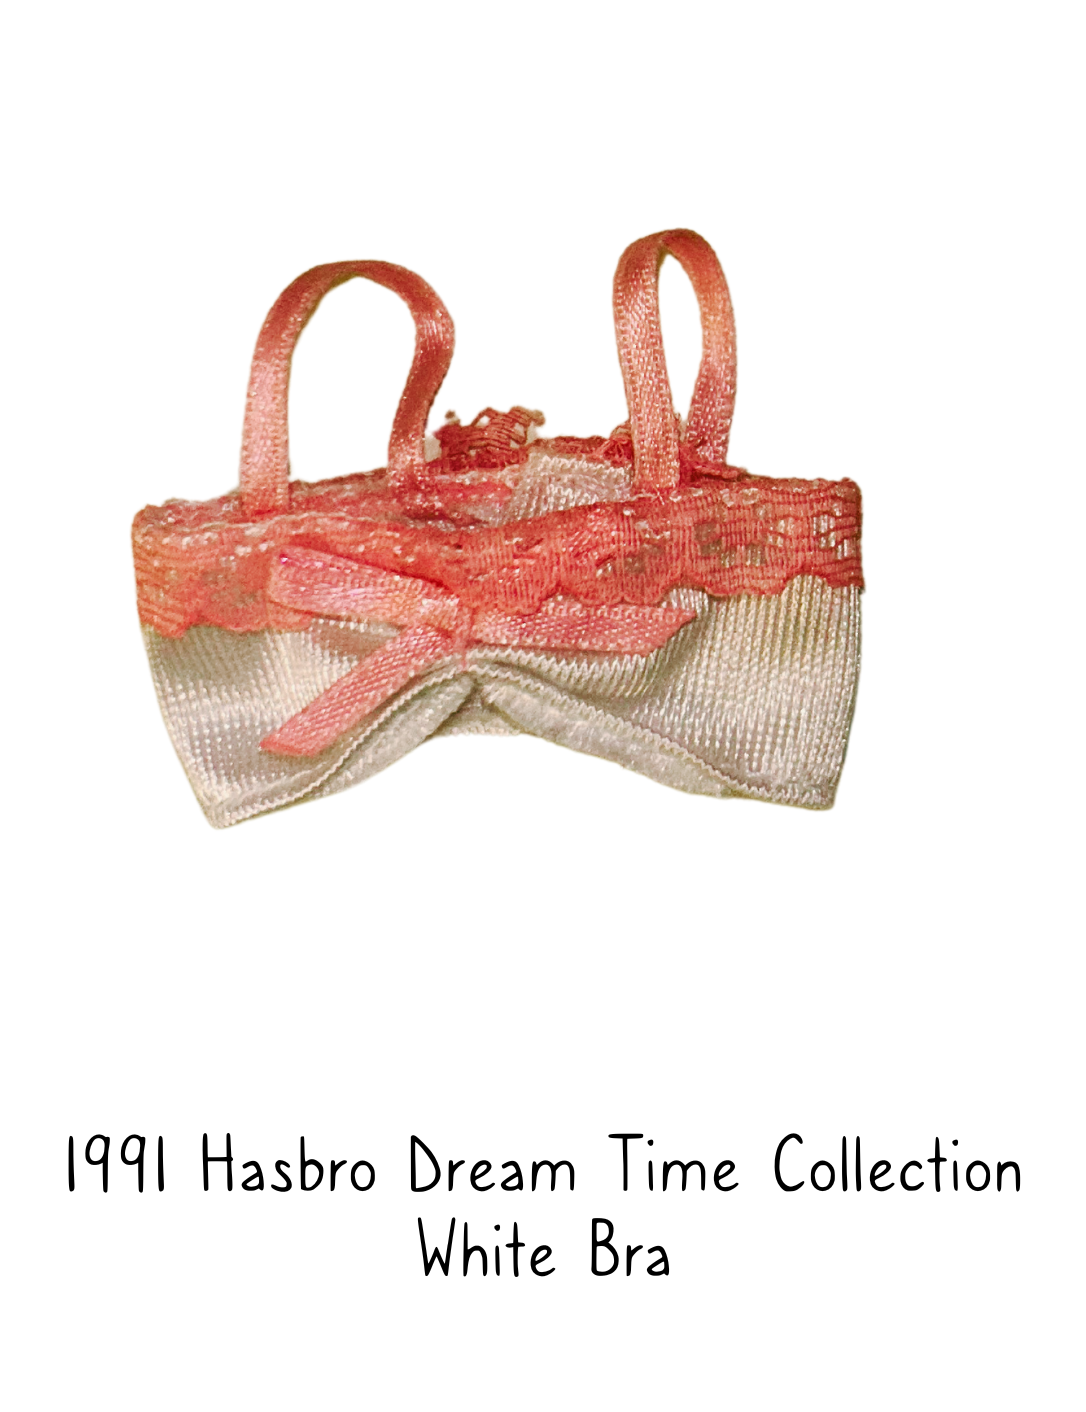 1991 Hasbro Sindy Dream Time Lingerie Collection White Bra